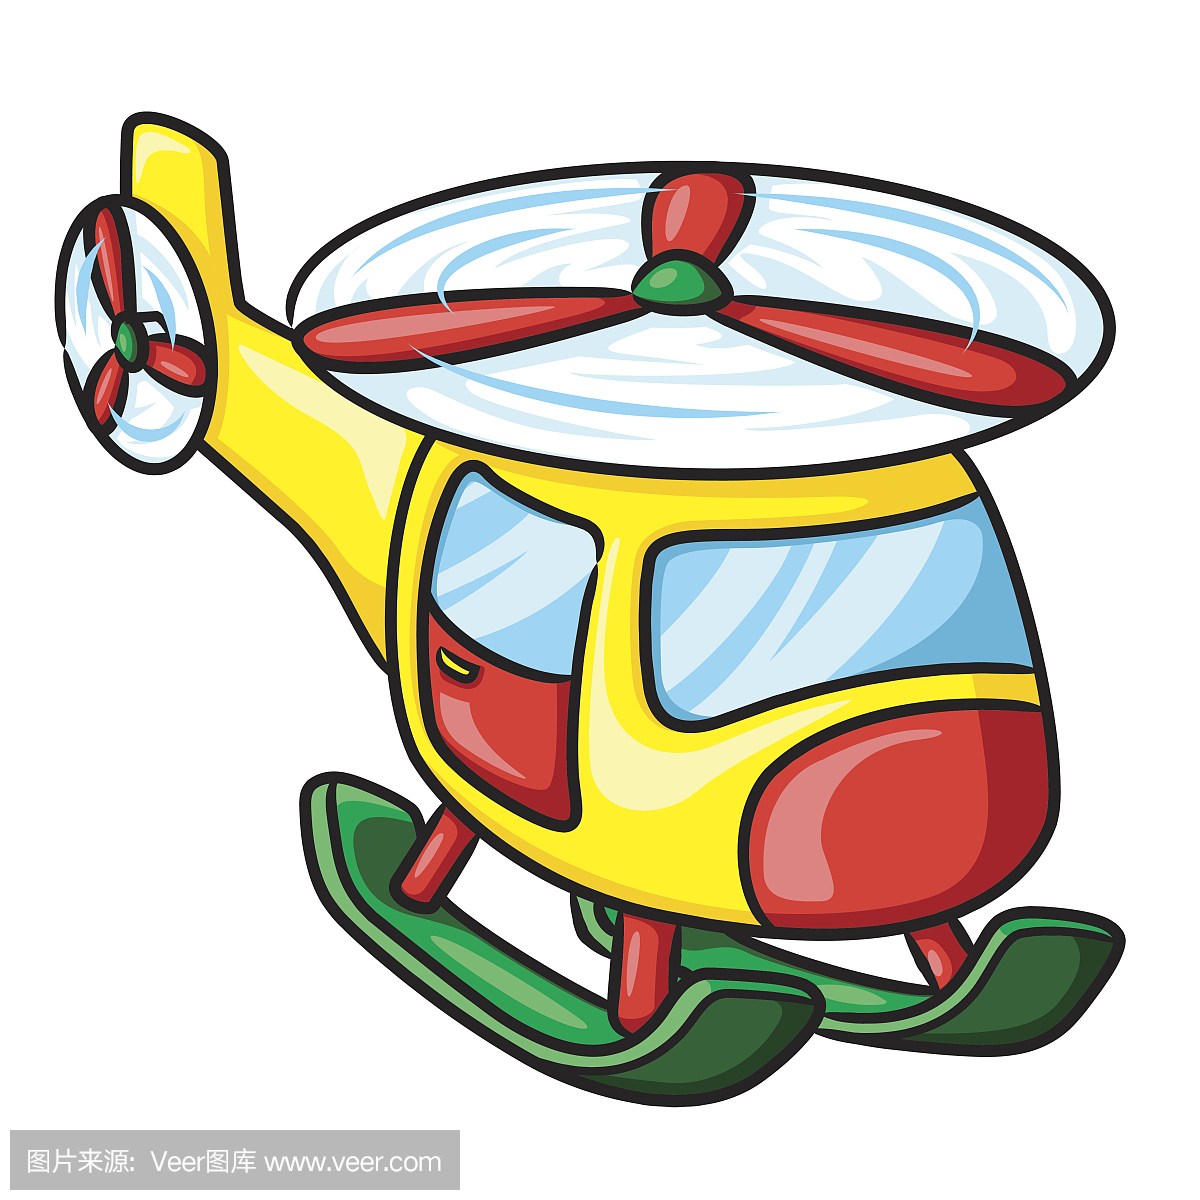 Helicopters PNG Transparent Picture | PNG Mart